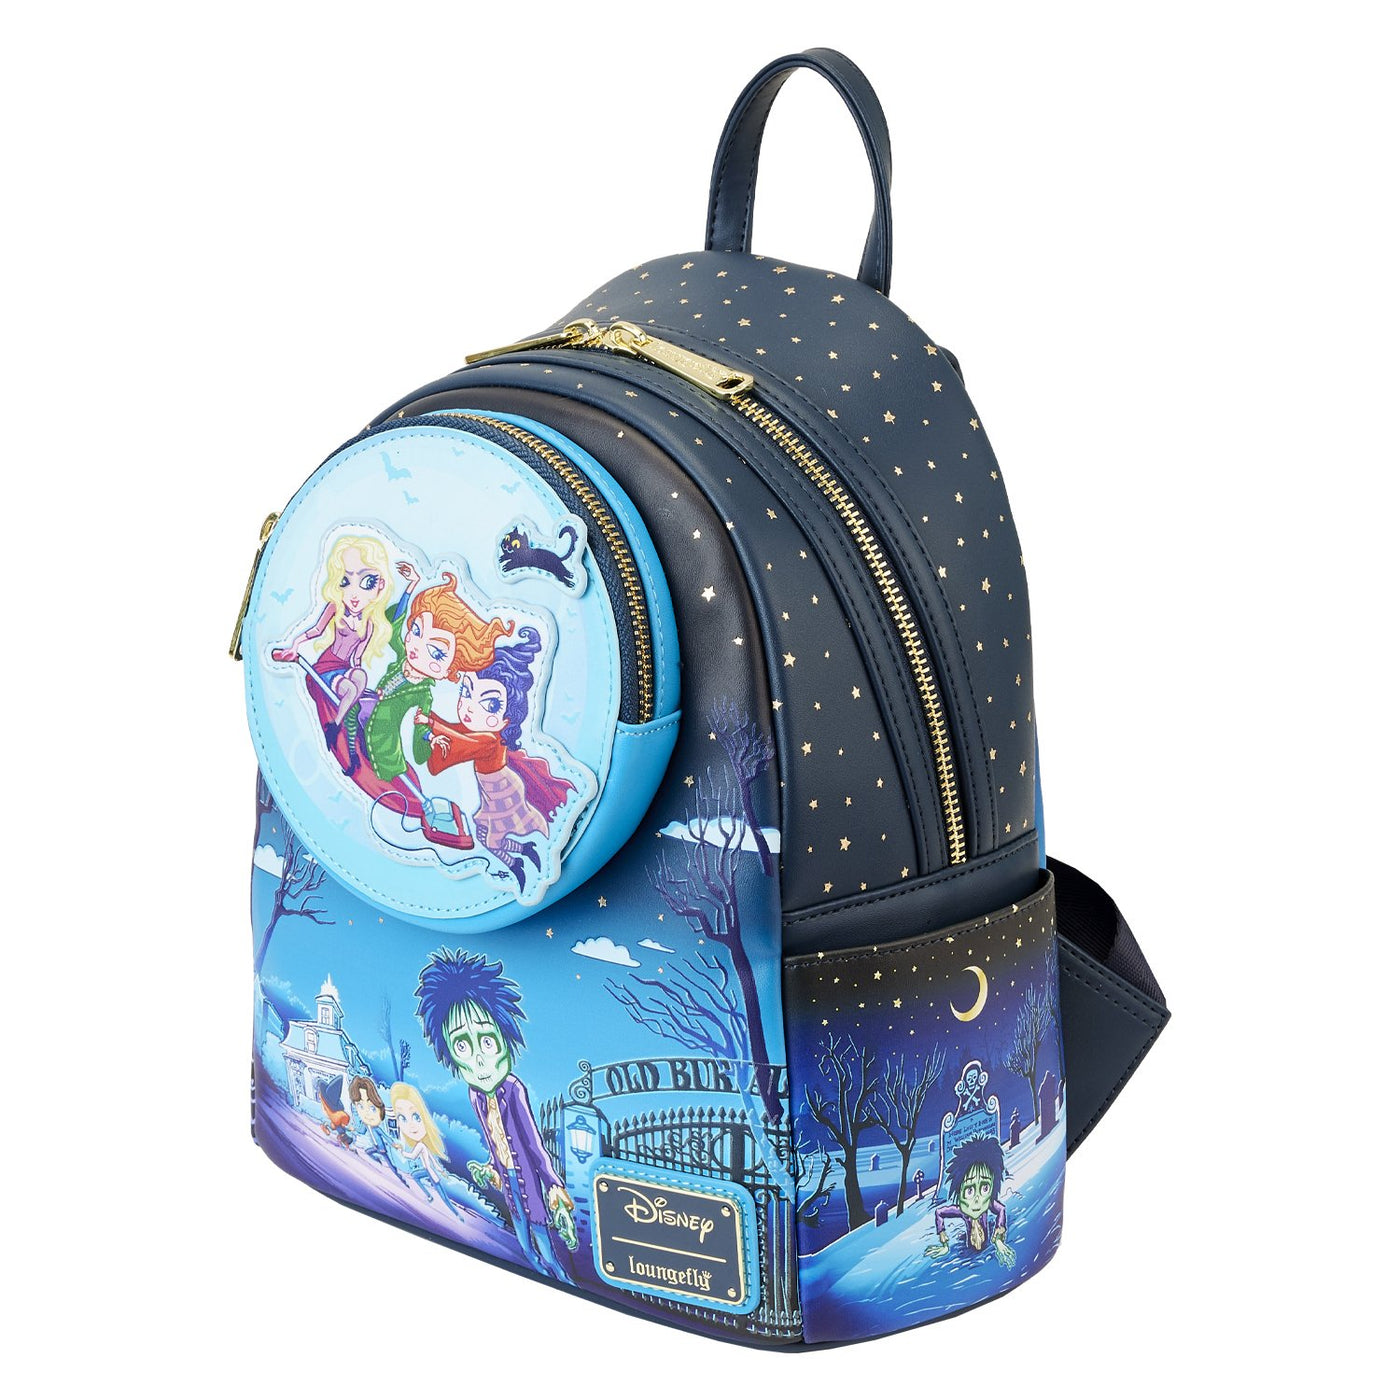 Loungefly Disney Hocus Pocus Poster Mini Backpack - Top View